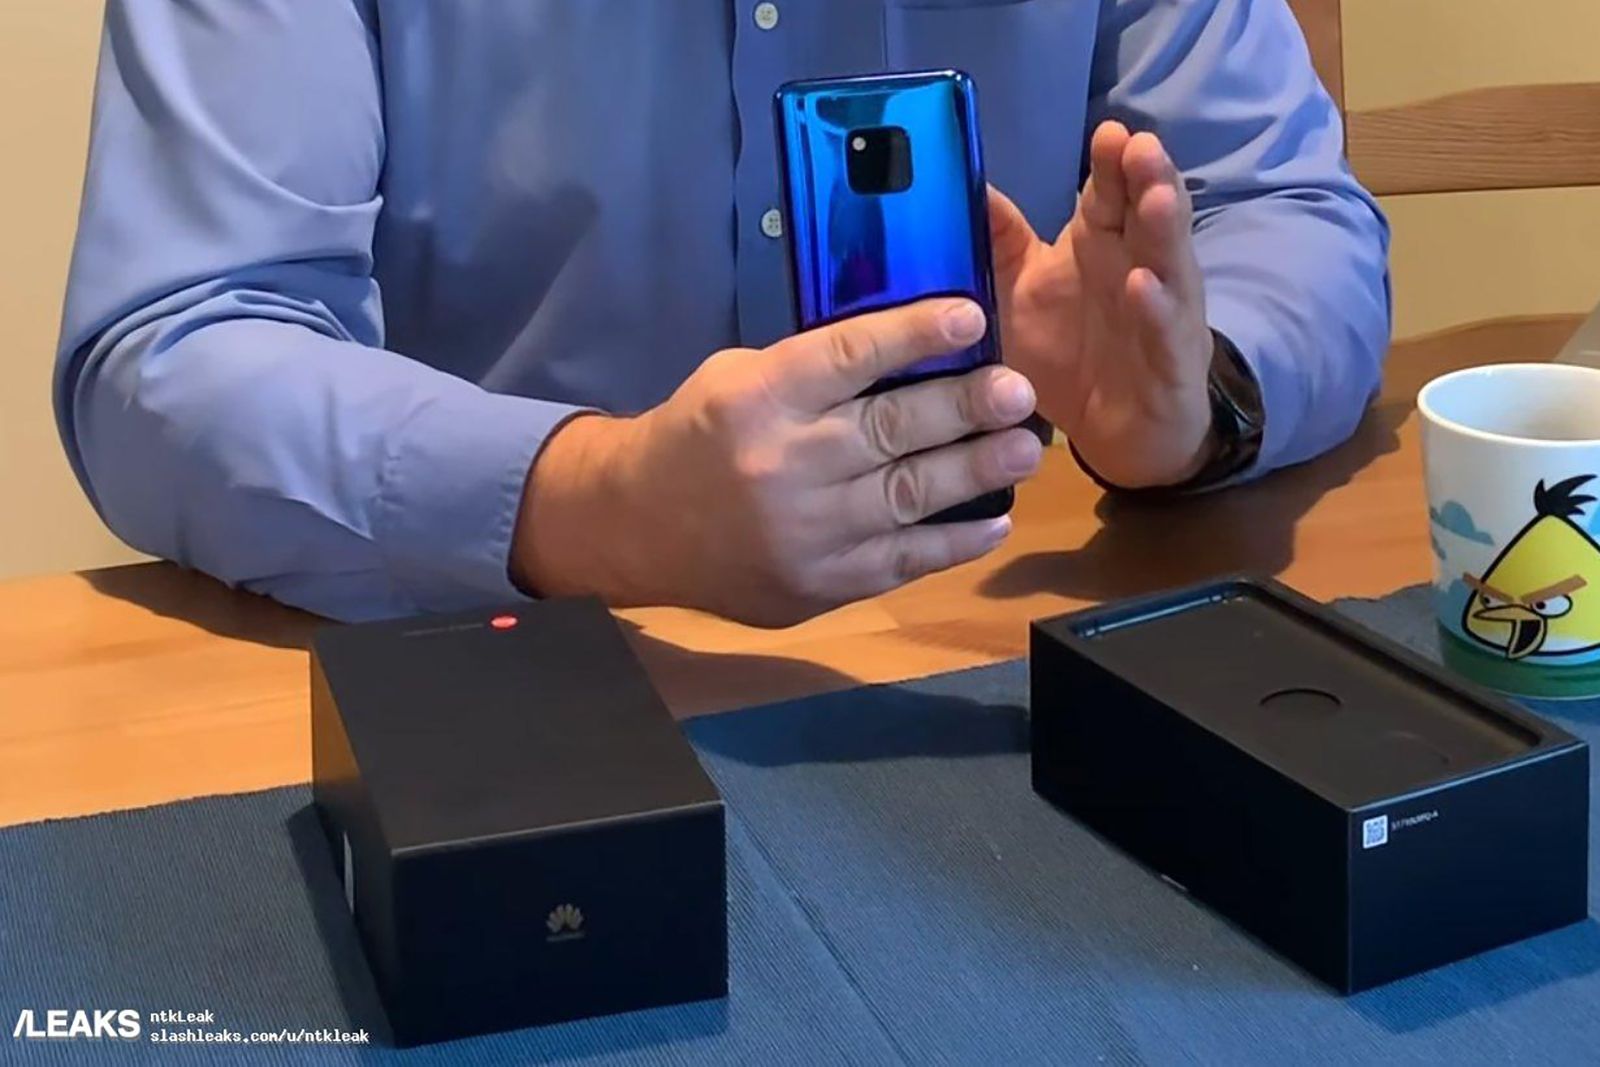 Huawei Mate 20 Pro unboxing video leaks see it clear as day image 1